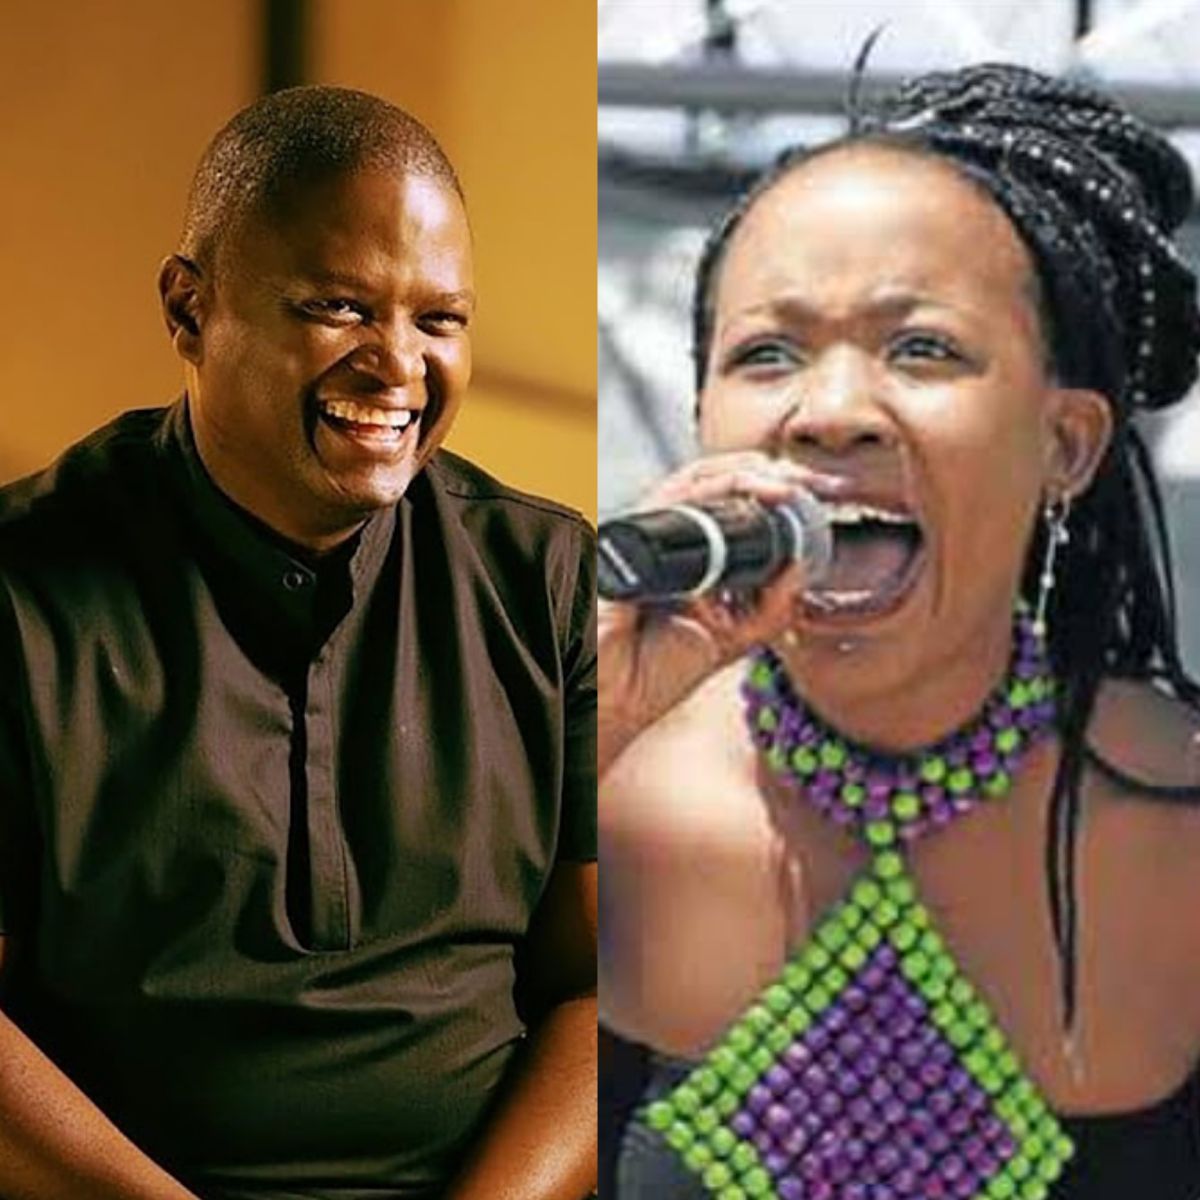 Music Executive, Vusi Leeuw, Throws Shade At Ntsiki Mazwai With A Subliminal Post After Her Allegations 10